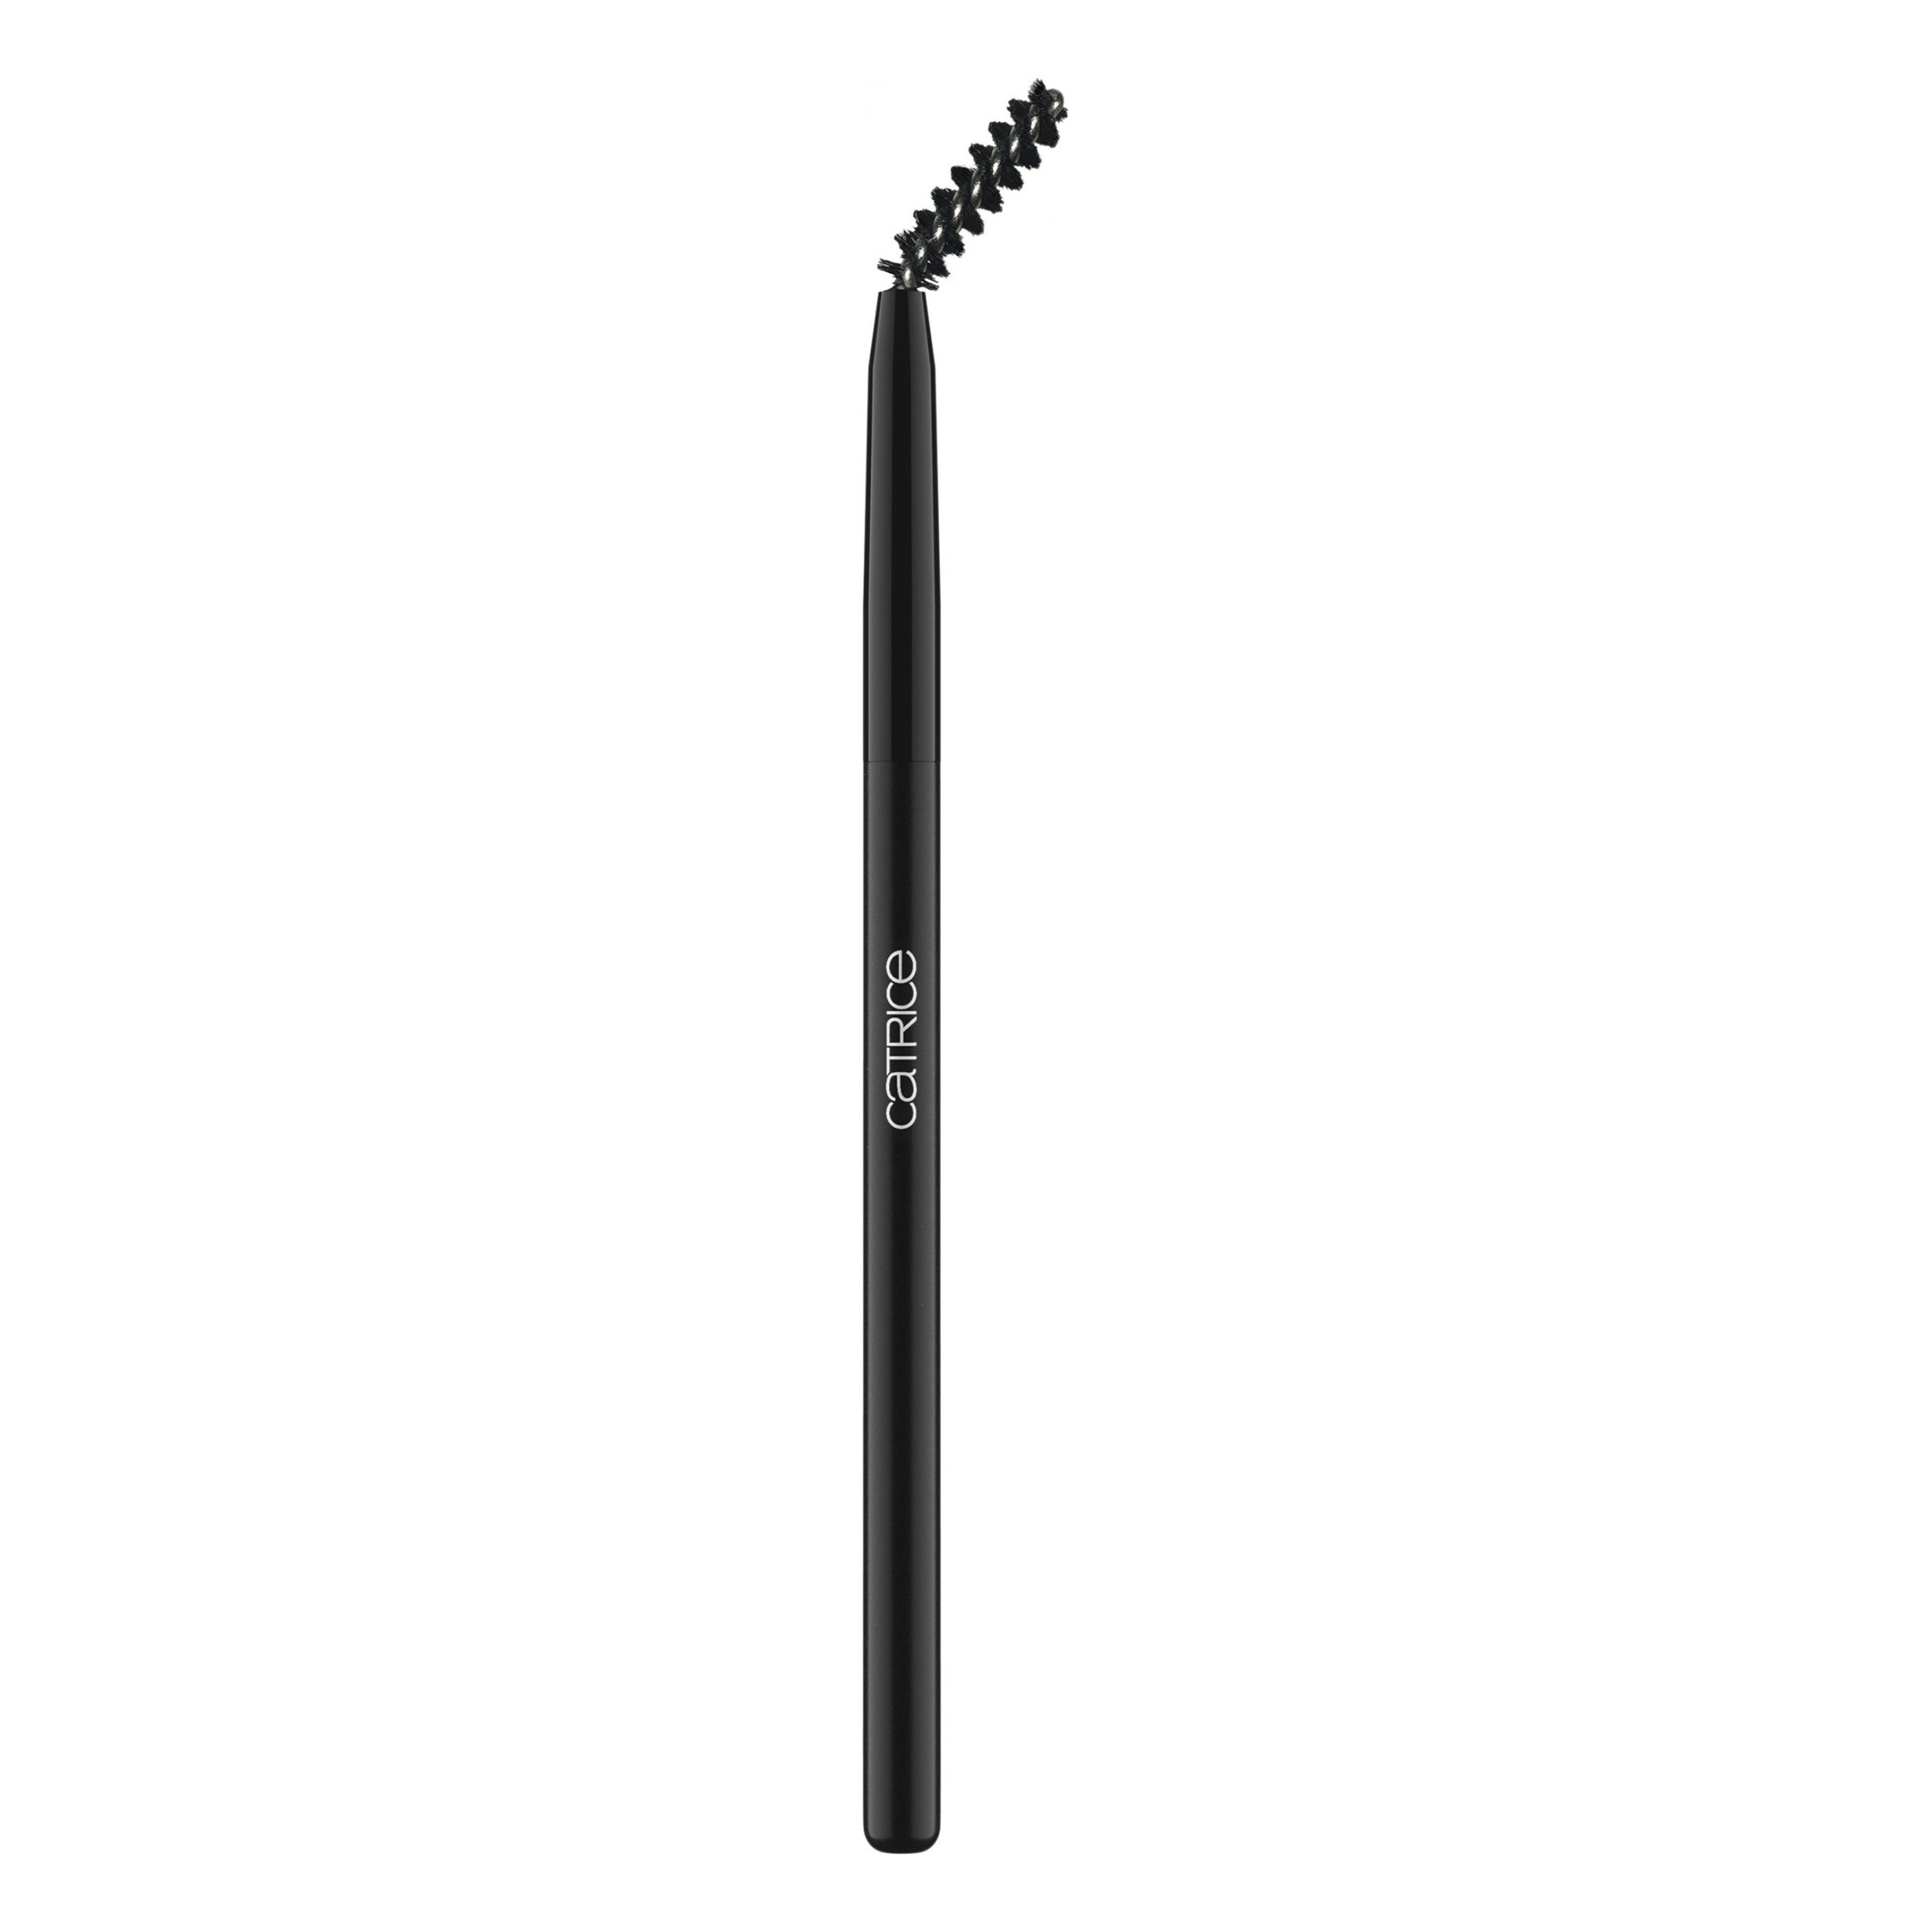 Augenbrauen-Pinsel - Lift Up Brow Styling Brush